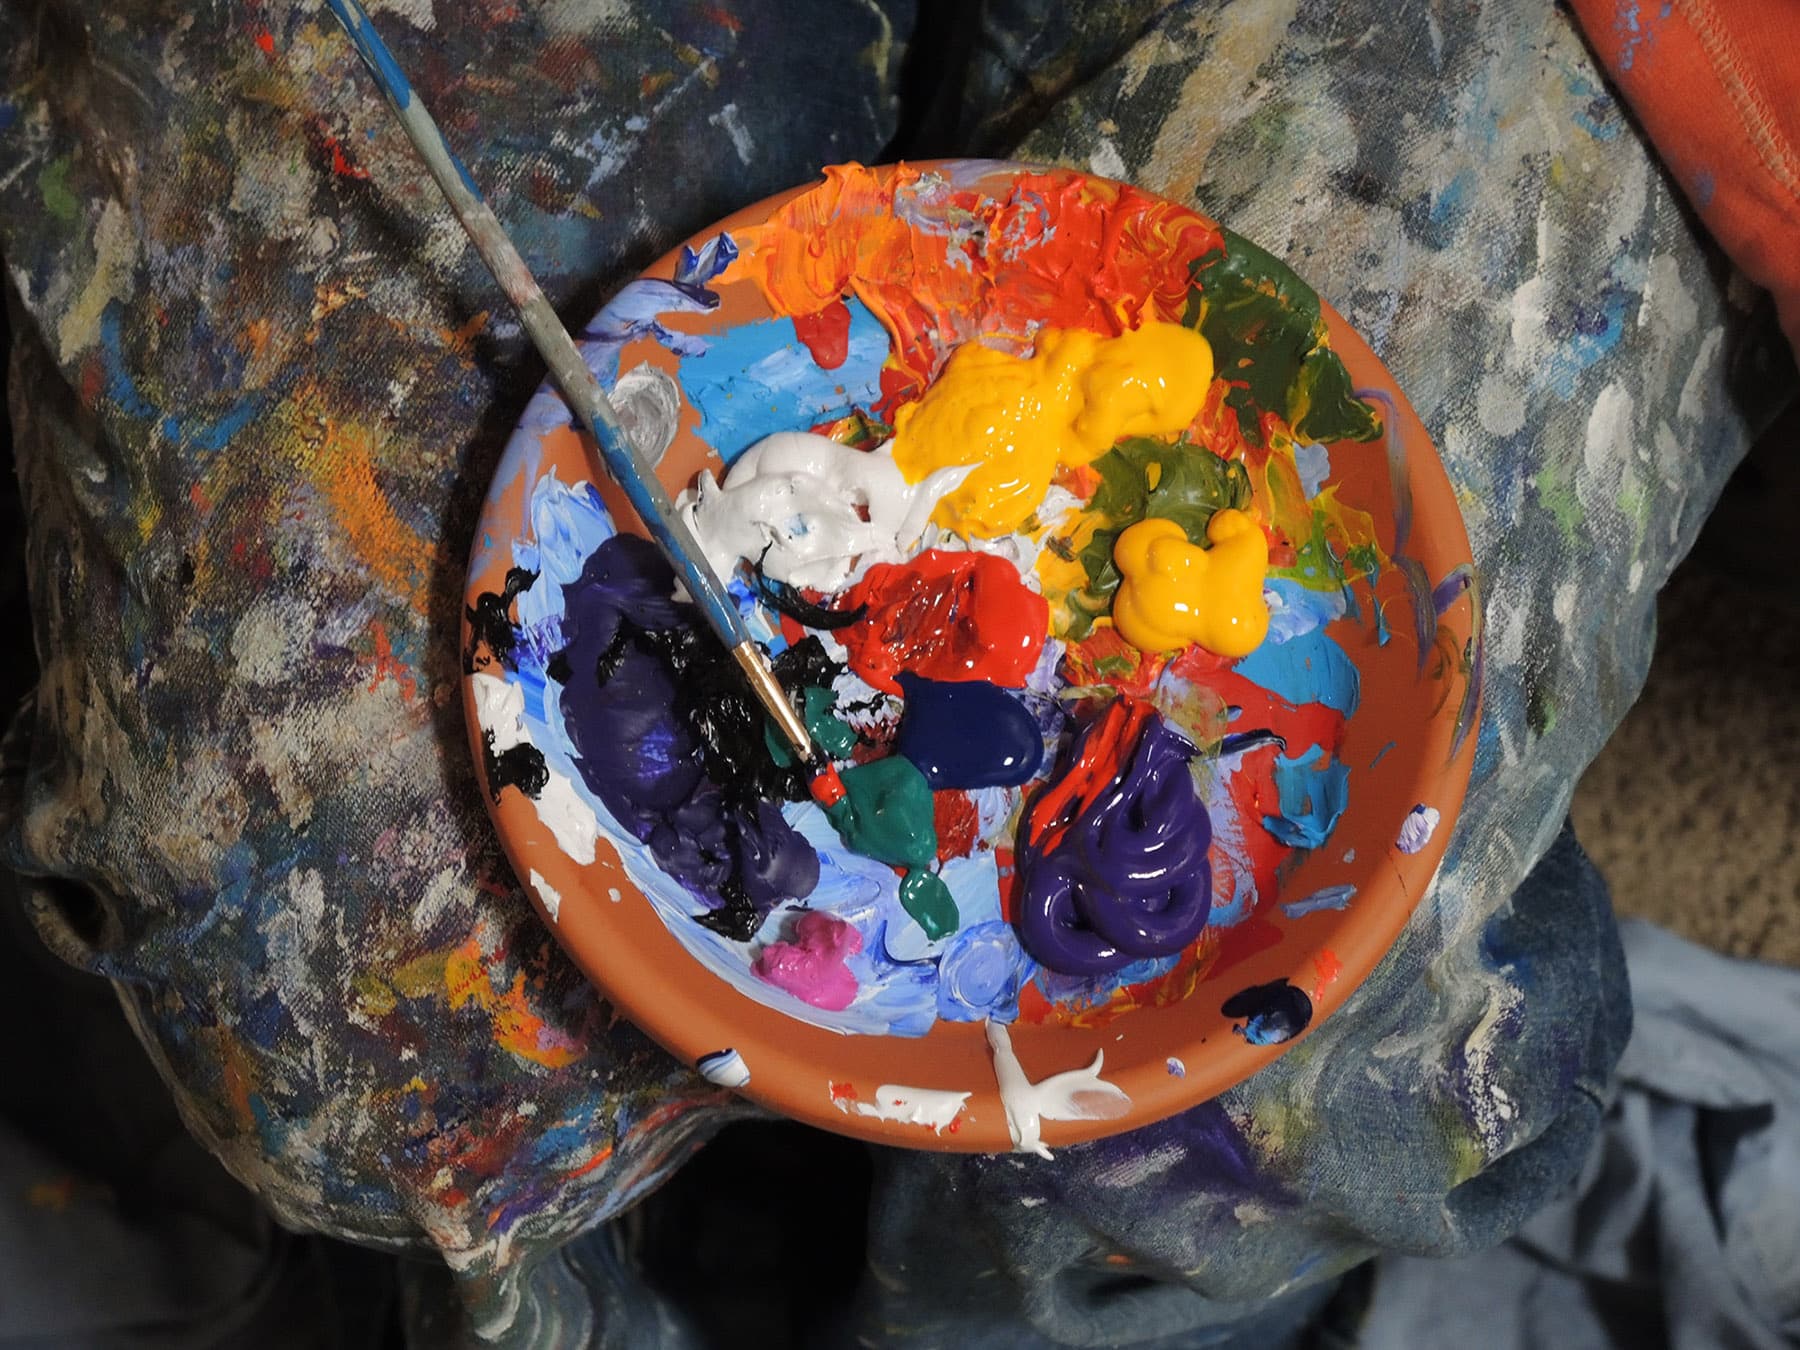 A shallow bowl on a very used paint stained surface. There are various colors of paint in the bowl with a paint brush left laying in it.